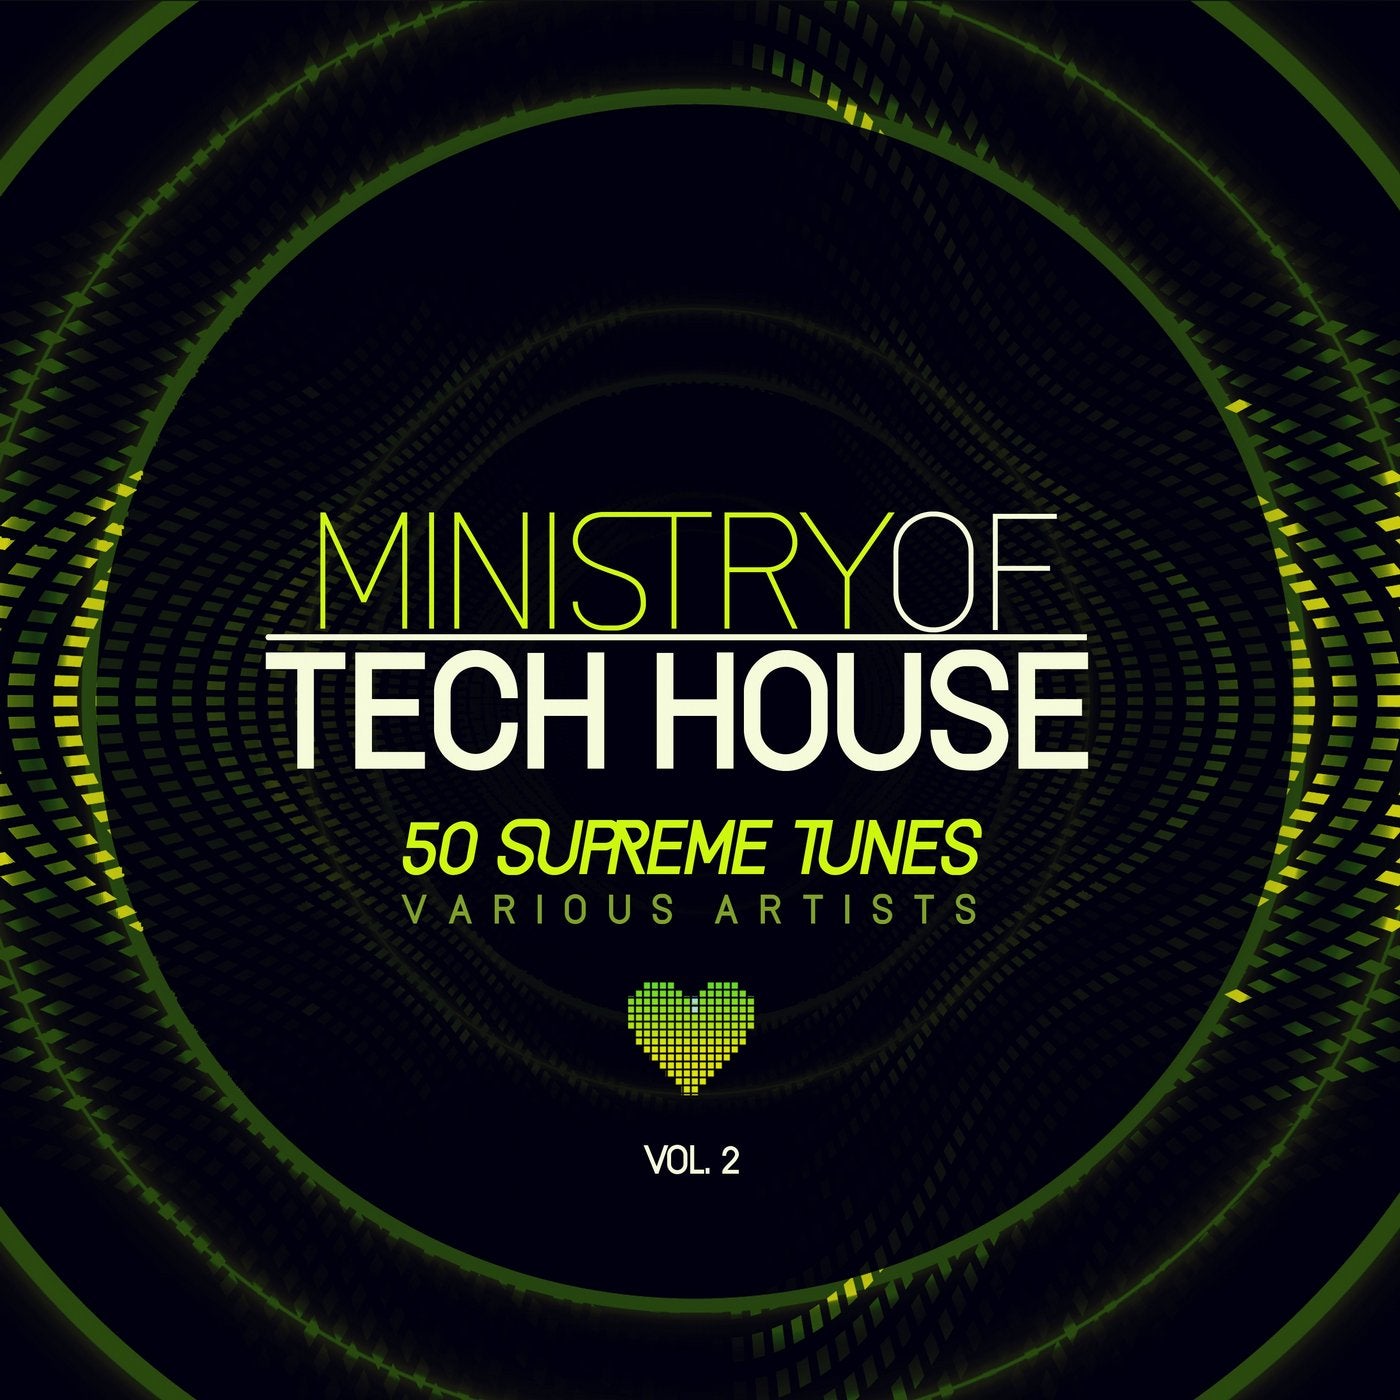 Ministry of Tech House (50 Supreme Tunes), Vol. 2